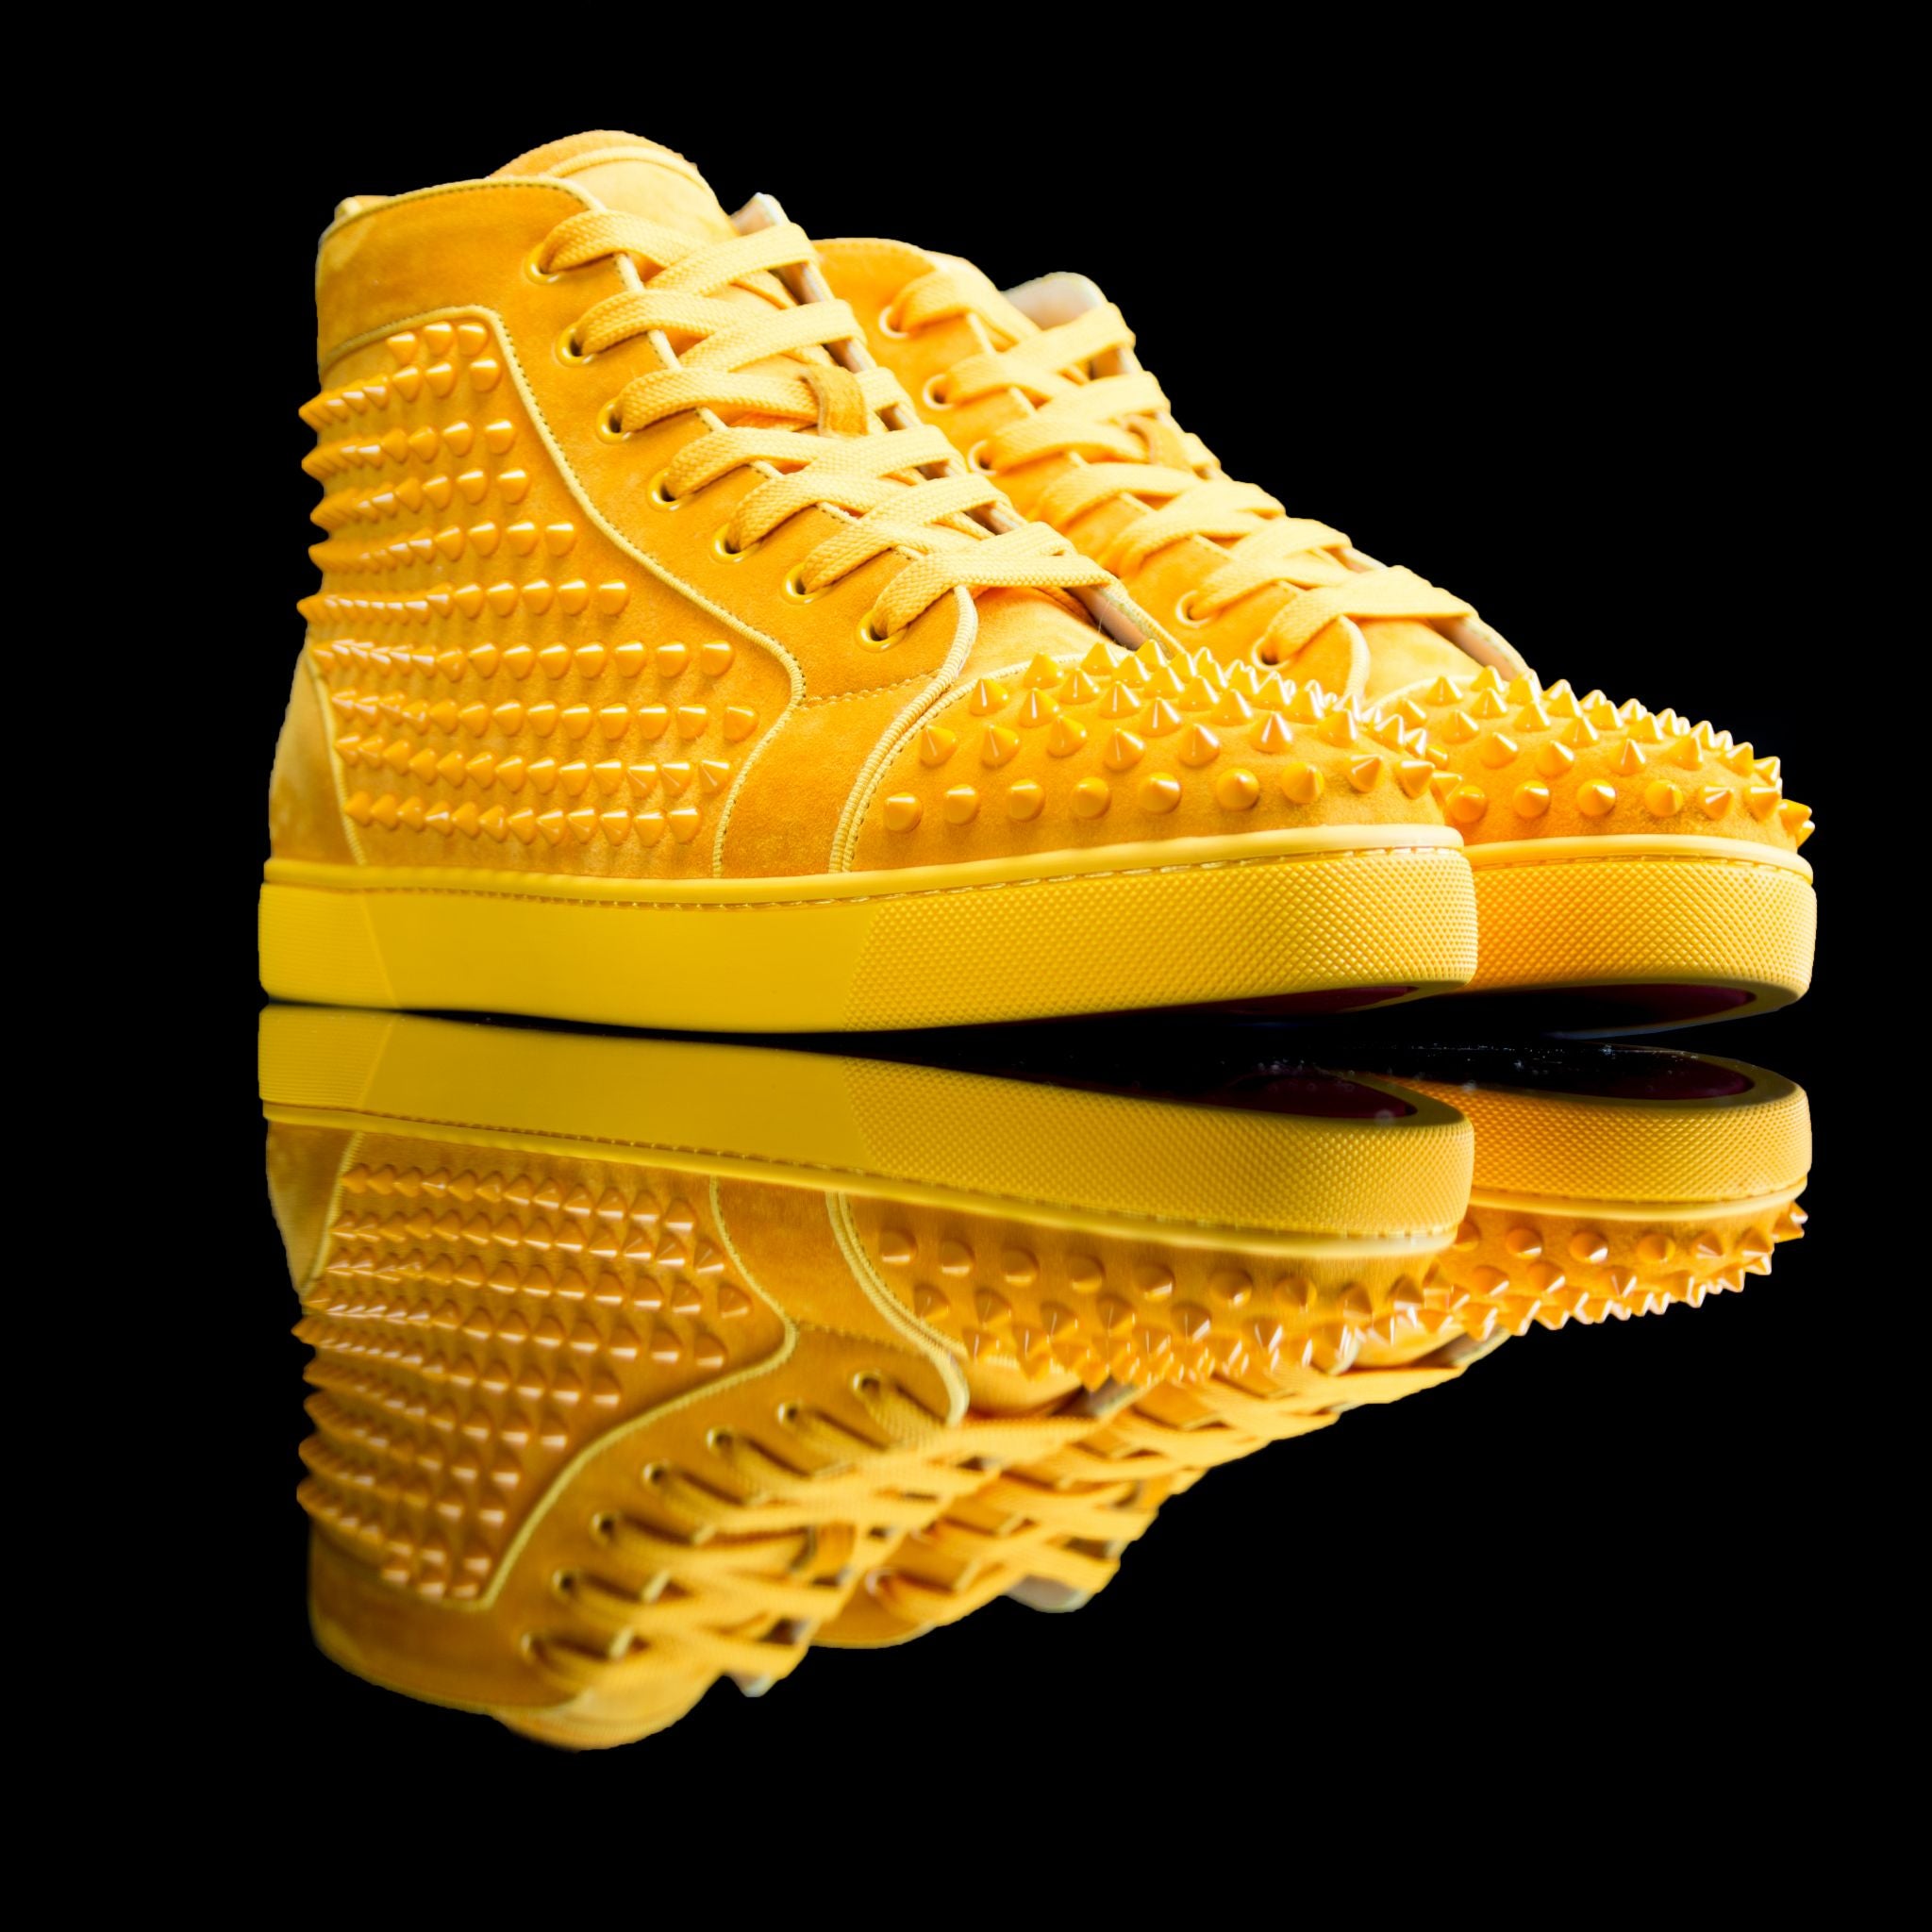 Christian Louboutin, Shoes, Suede Mustard Color Christian Louboutin Spike  Sneakers Louis